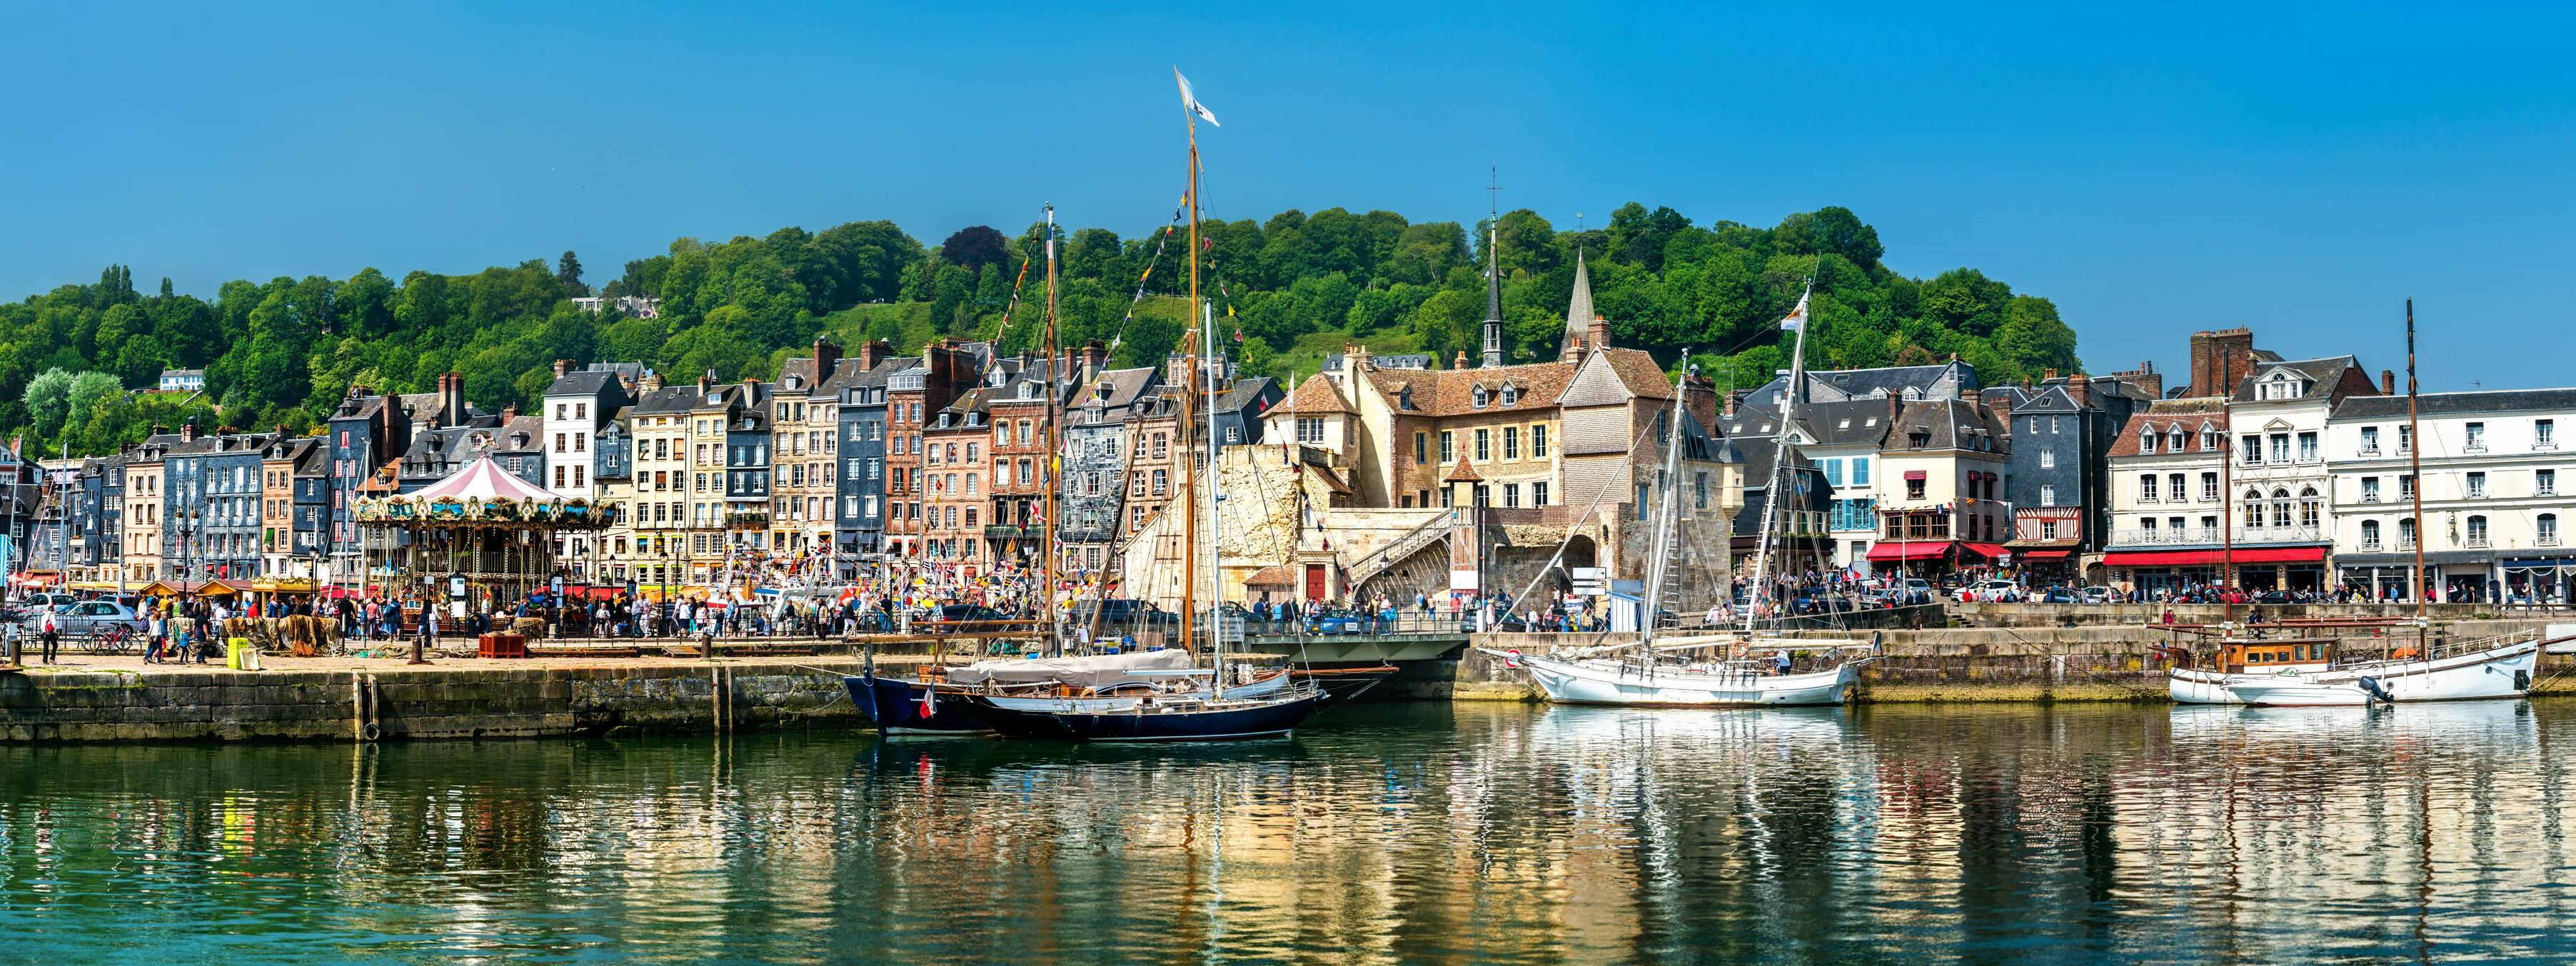 Boutique & charming hotels to stay in Normandy | The Originals Hotels